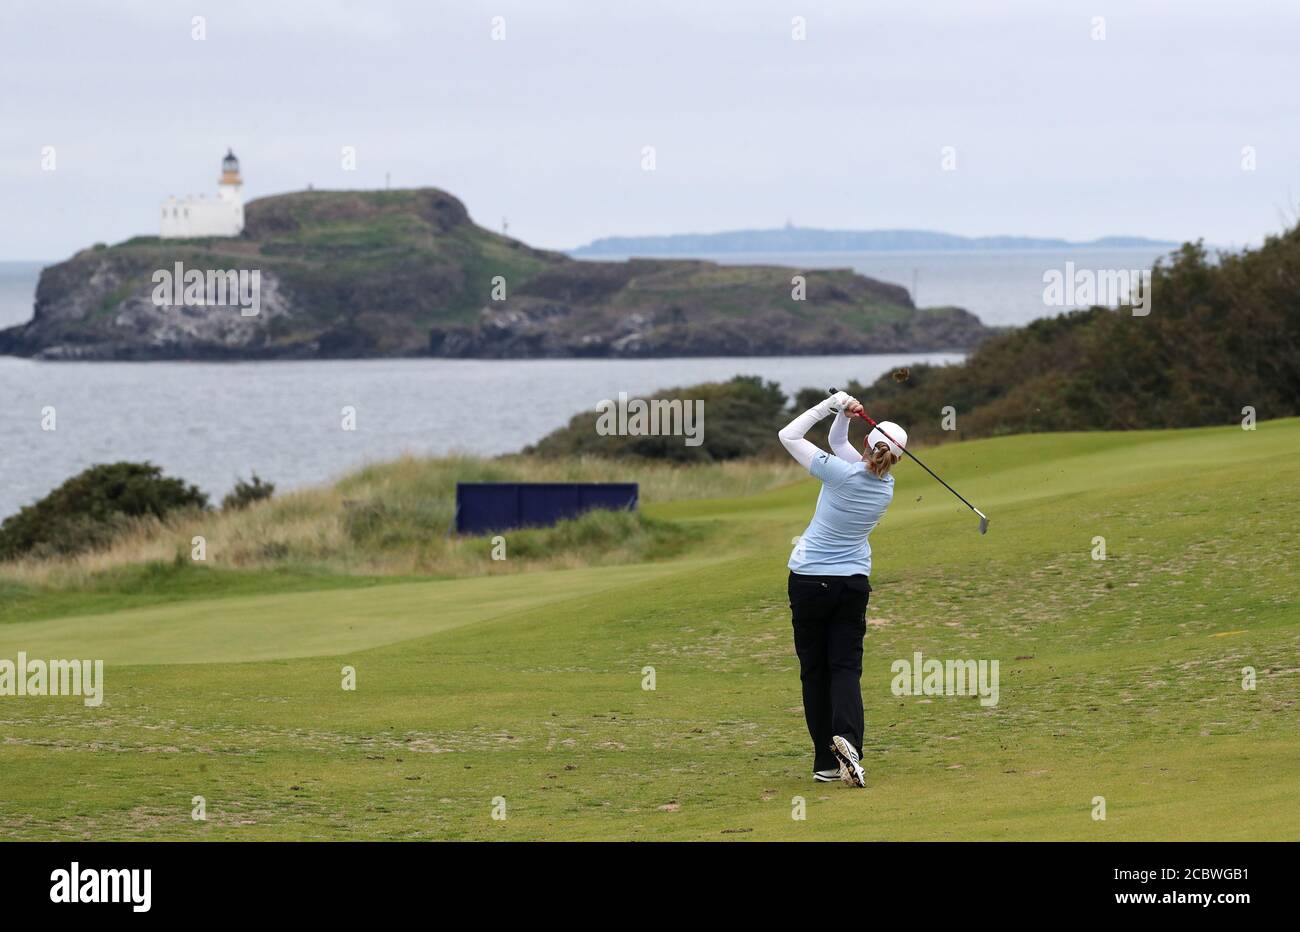 USA's Stacy Lewis on the thirteenth during day four of the Aberdeen Standard Investments Ladies Scottish Open at The Renaissance Club, North Berwick. Stock Photo